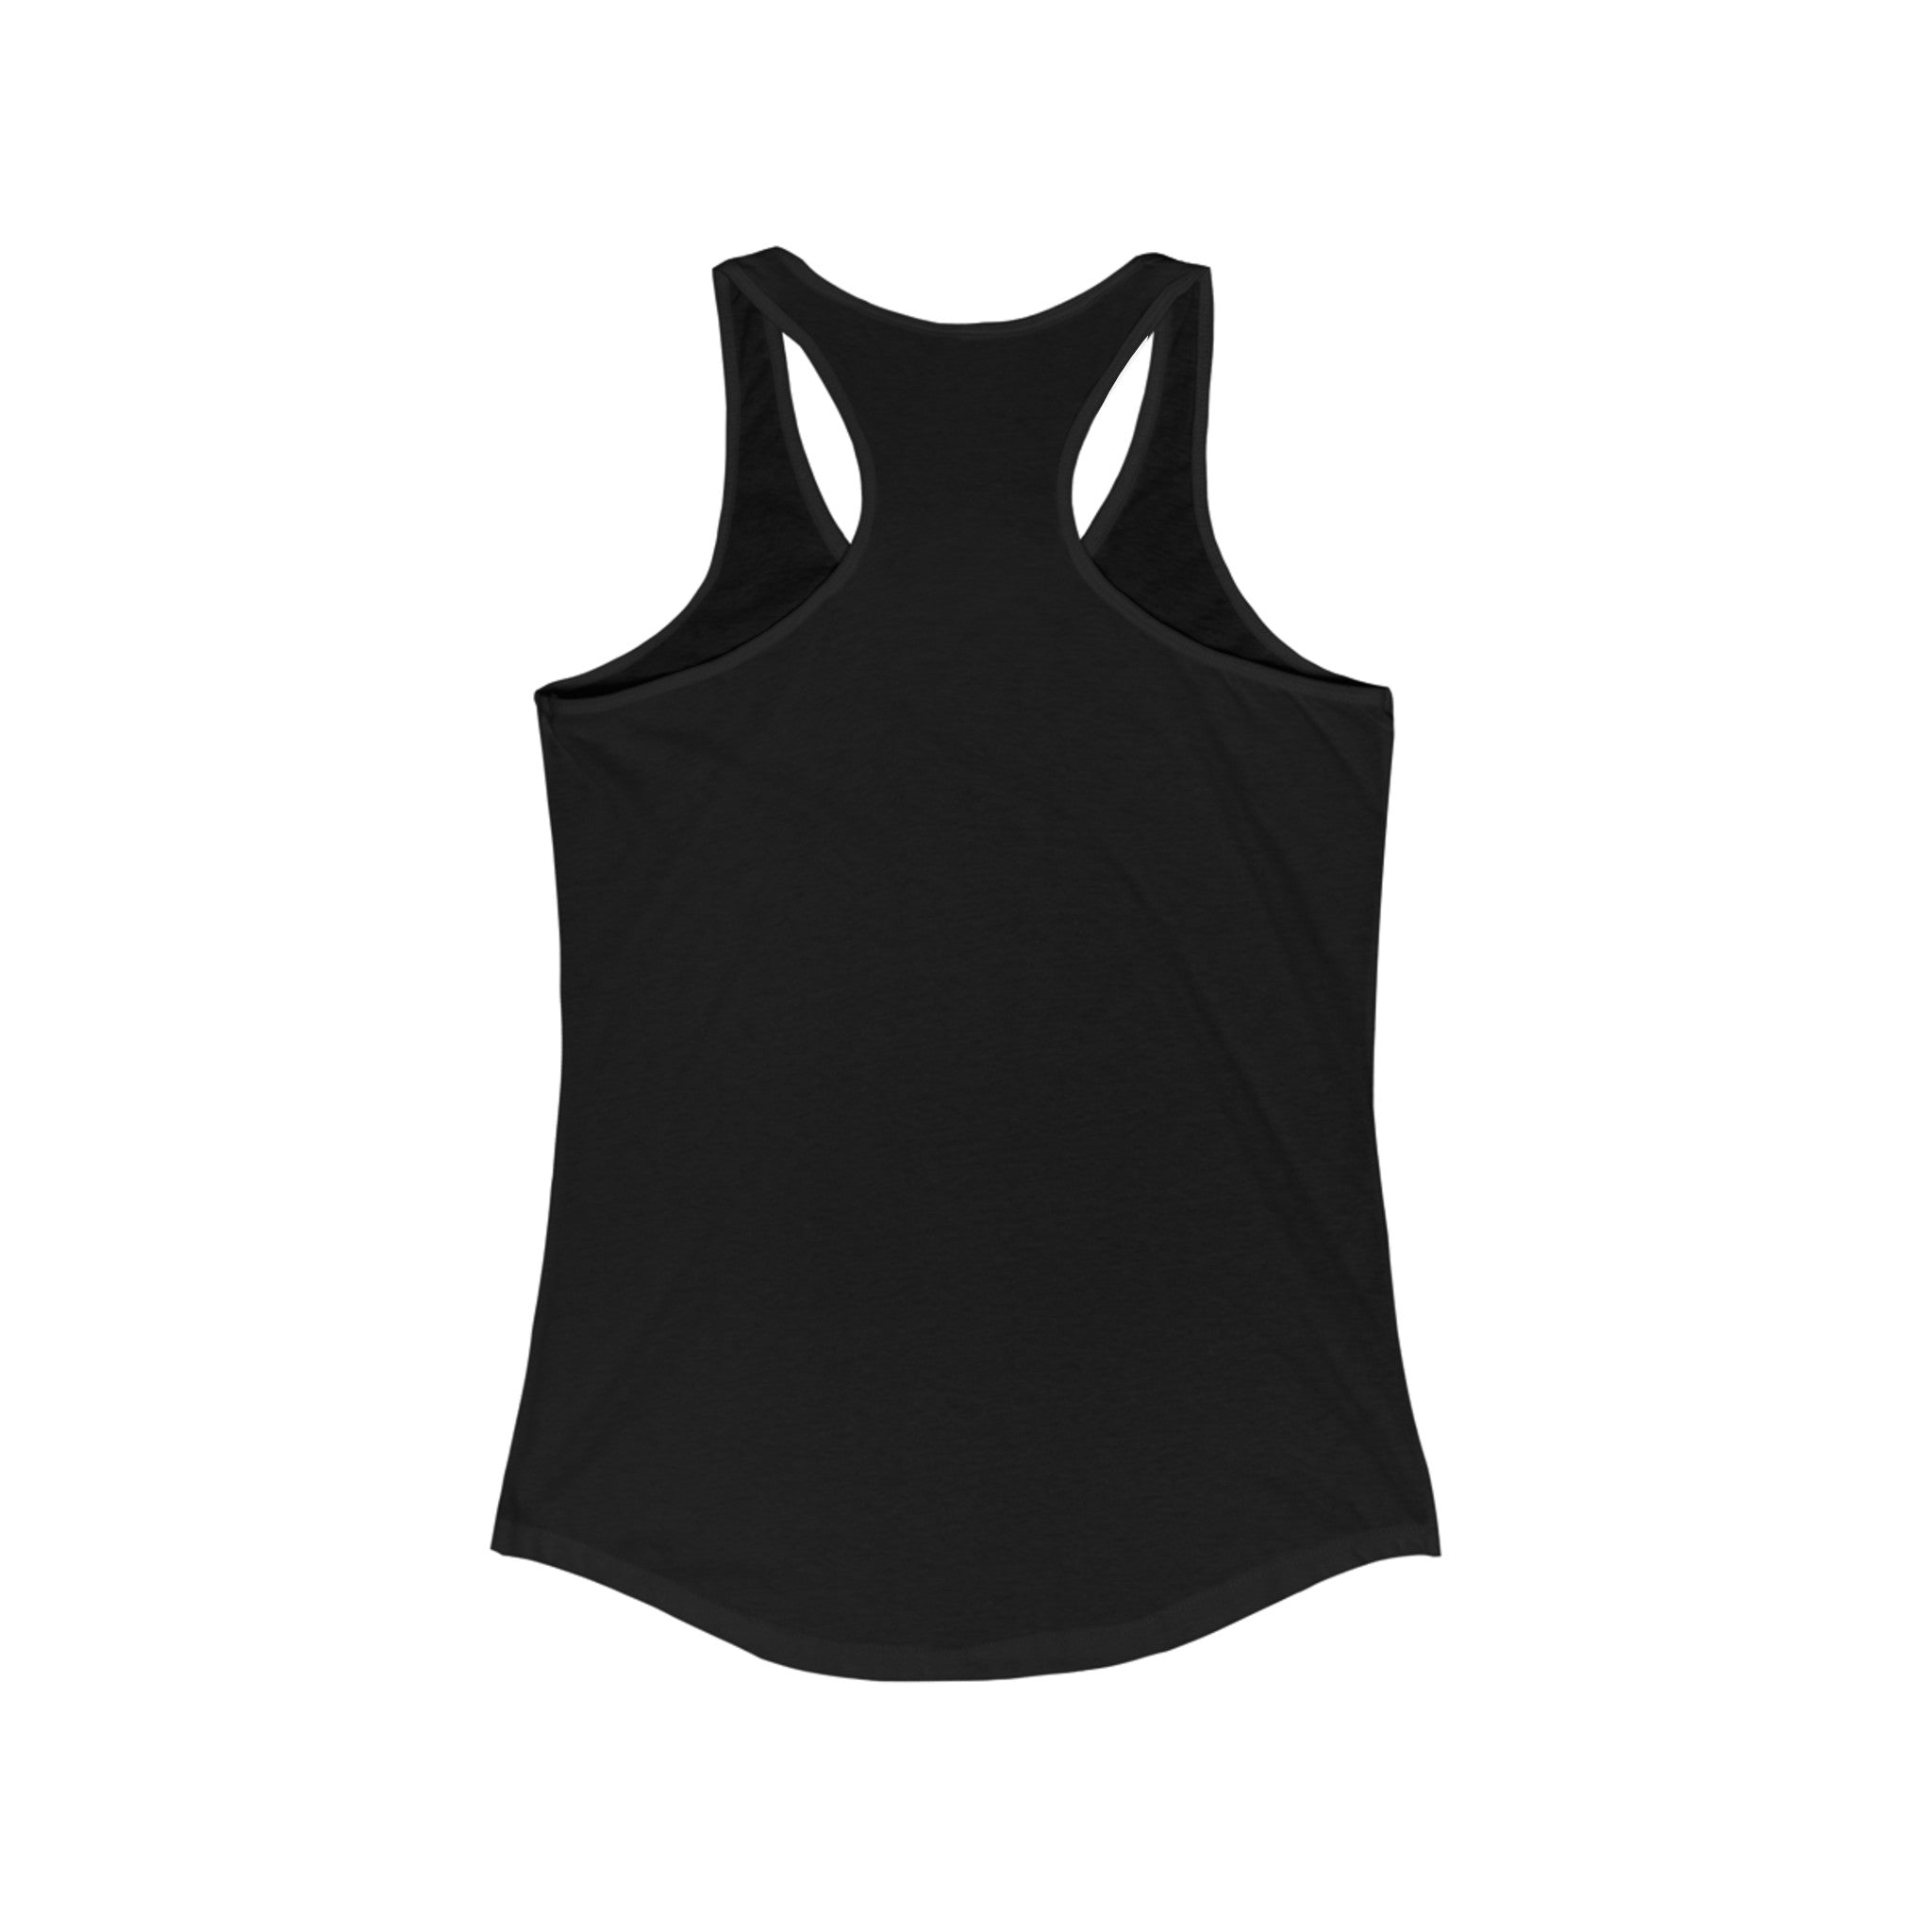 A plain black Ge-Ni-U-S - Women's Racerback Tank is shown from the back, a lightweight workout essential perfect for an active lifestyle.